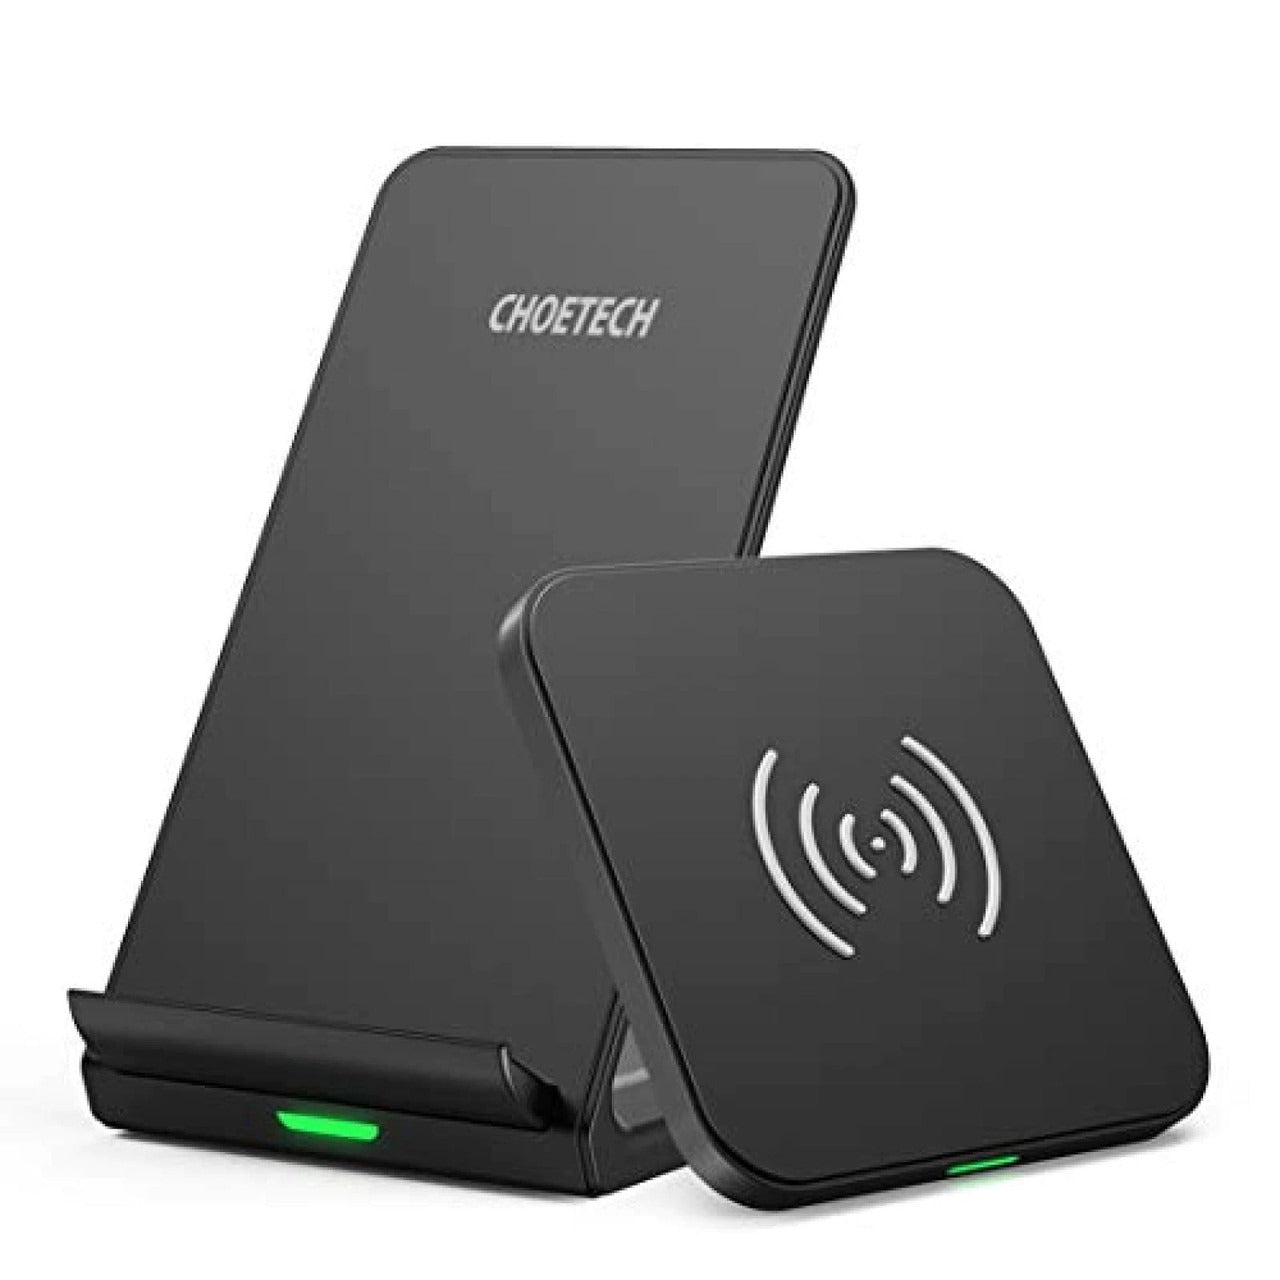 Choetech 10W Qi Wireless Charger Kit Phone Stand Black (T524-S) + 10W Qi Wireless Charger for Headphone Phone Black (T511-S)